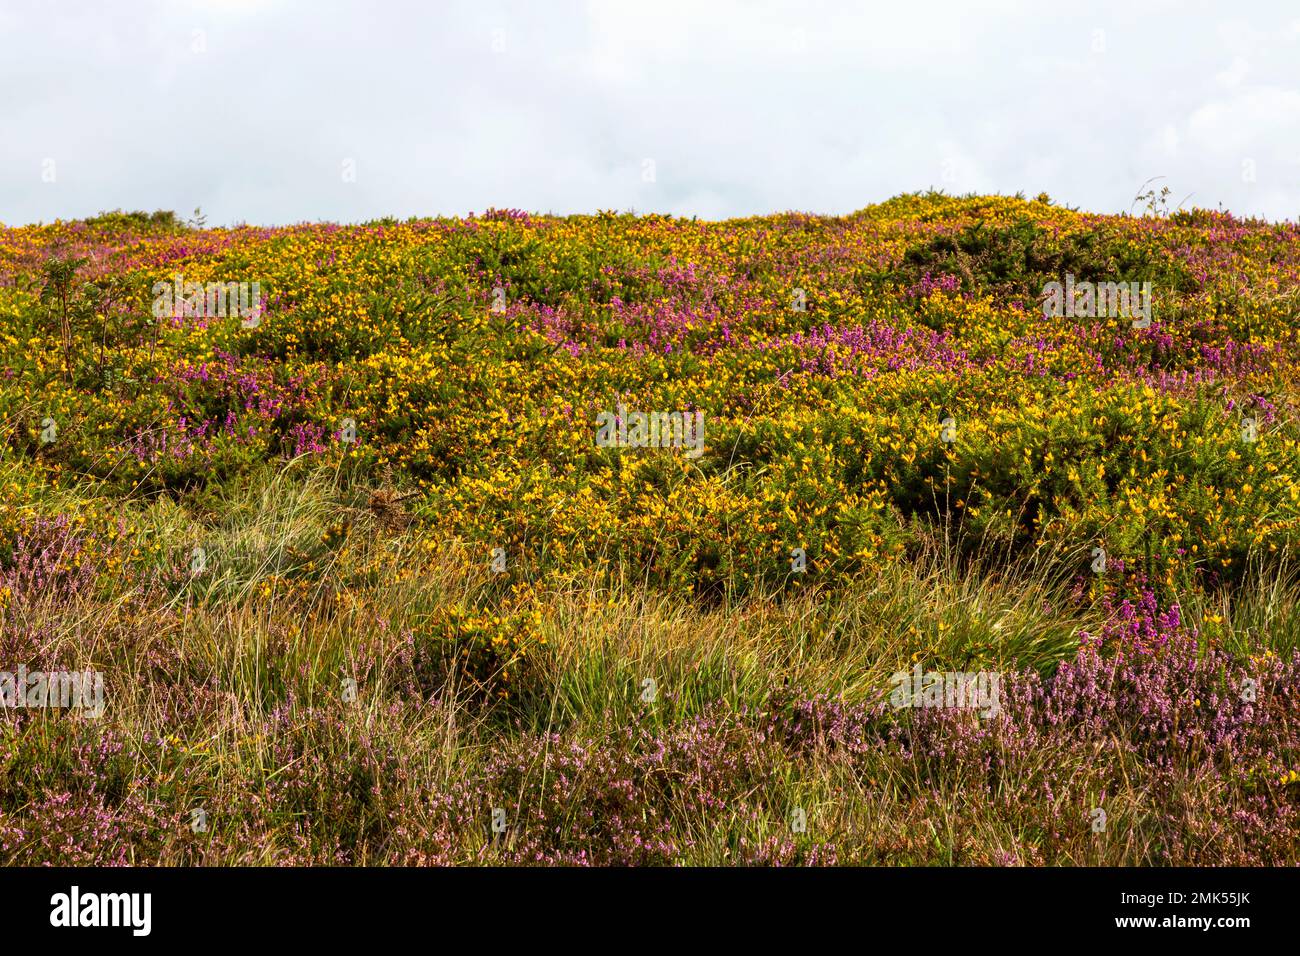 View of heather, gorse and long grasses on Exmoor, UK Stock Photo